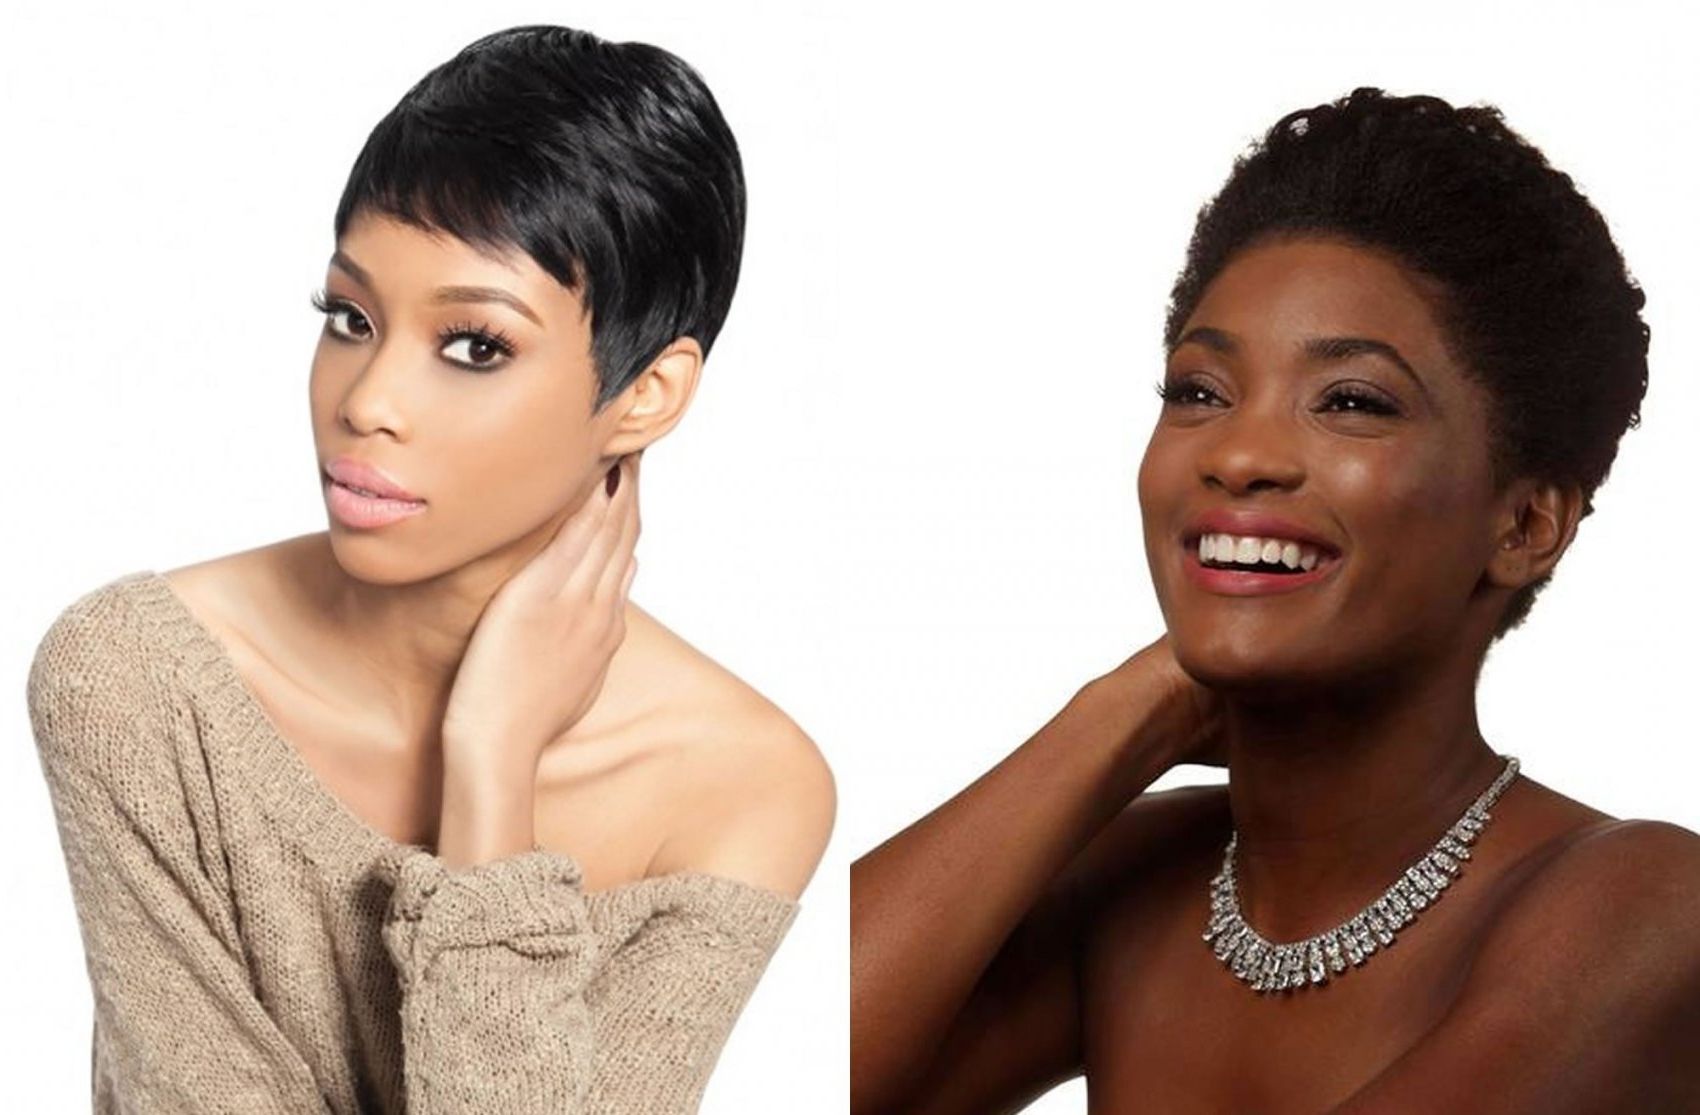 Pixie Hairstyles For Black Women – 60 Cool Short Haircuts For 2017 With Most Current Short Pixie Hairstyles For Black Women (View 2 of 15)